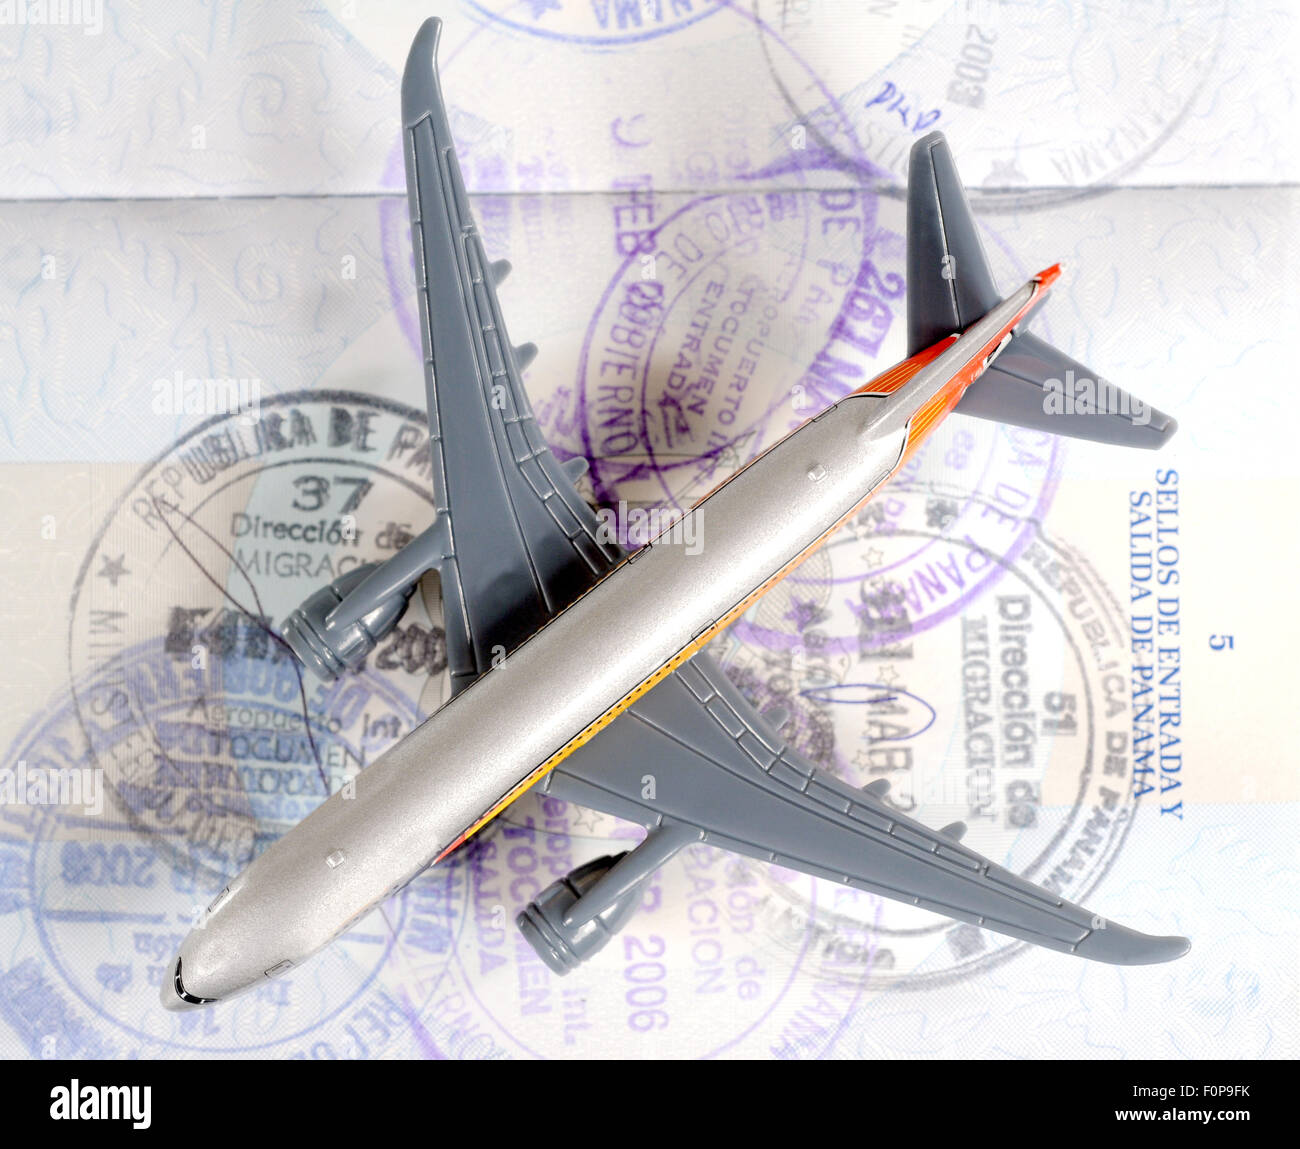 Toy plane over an open passport showing travel seals Stock Photo